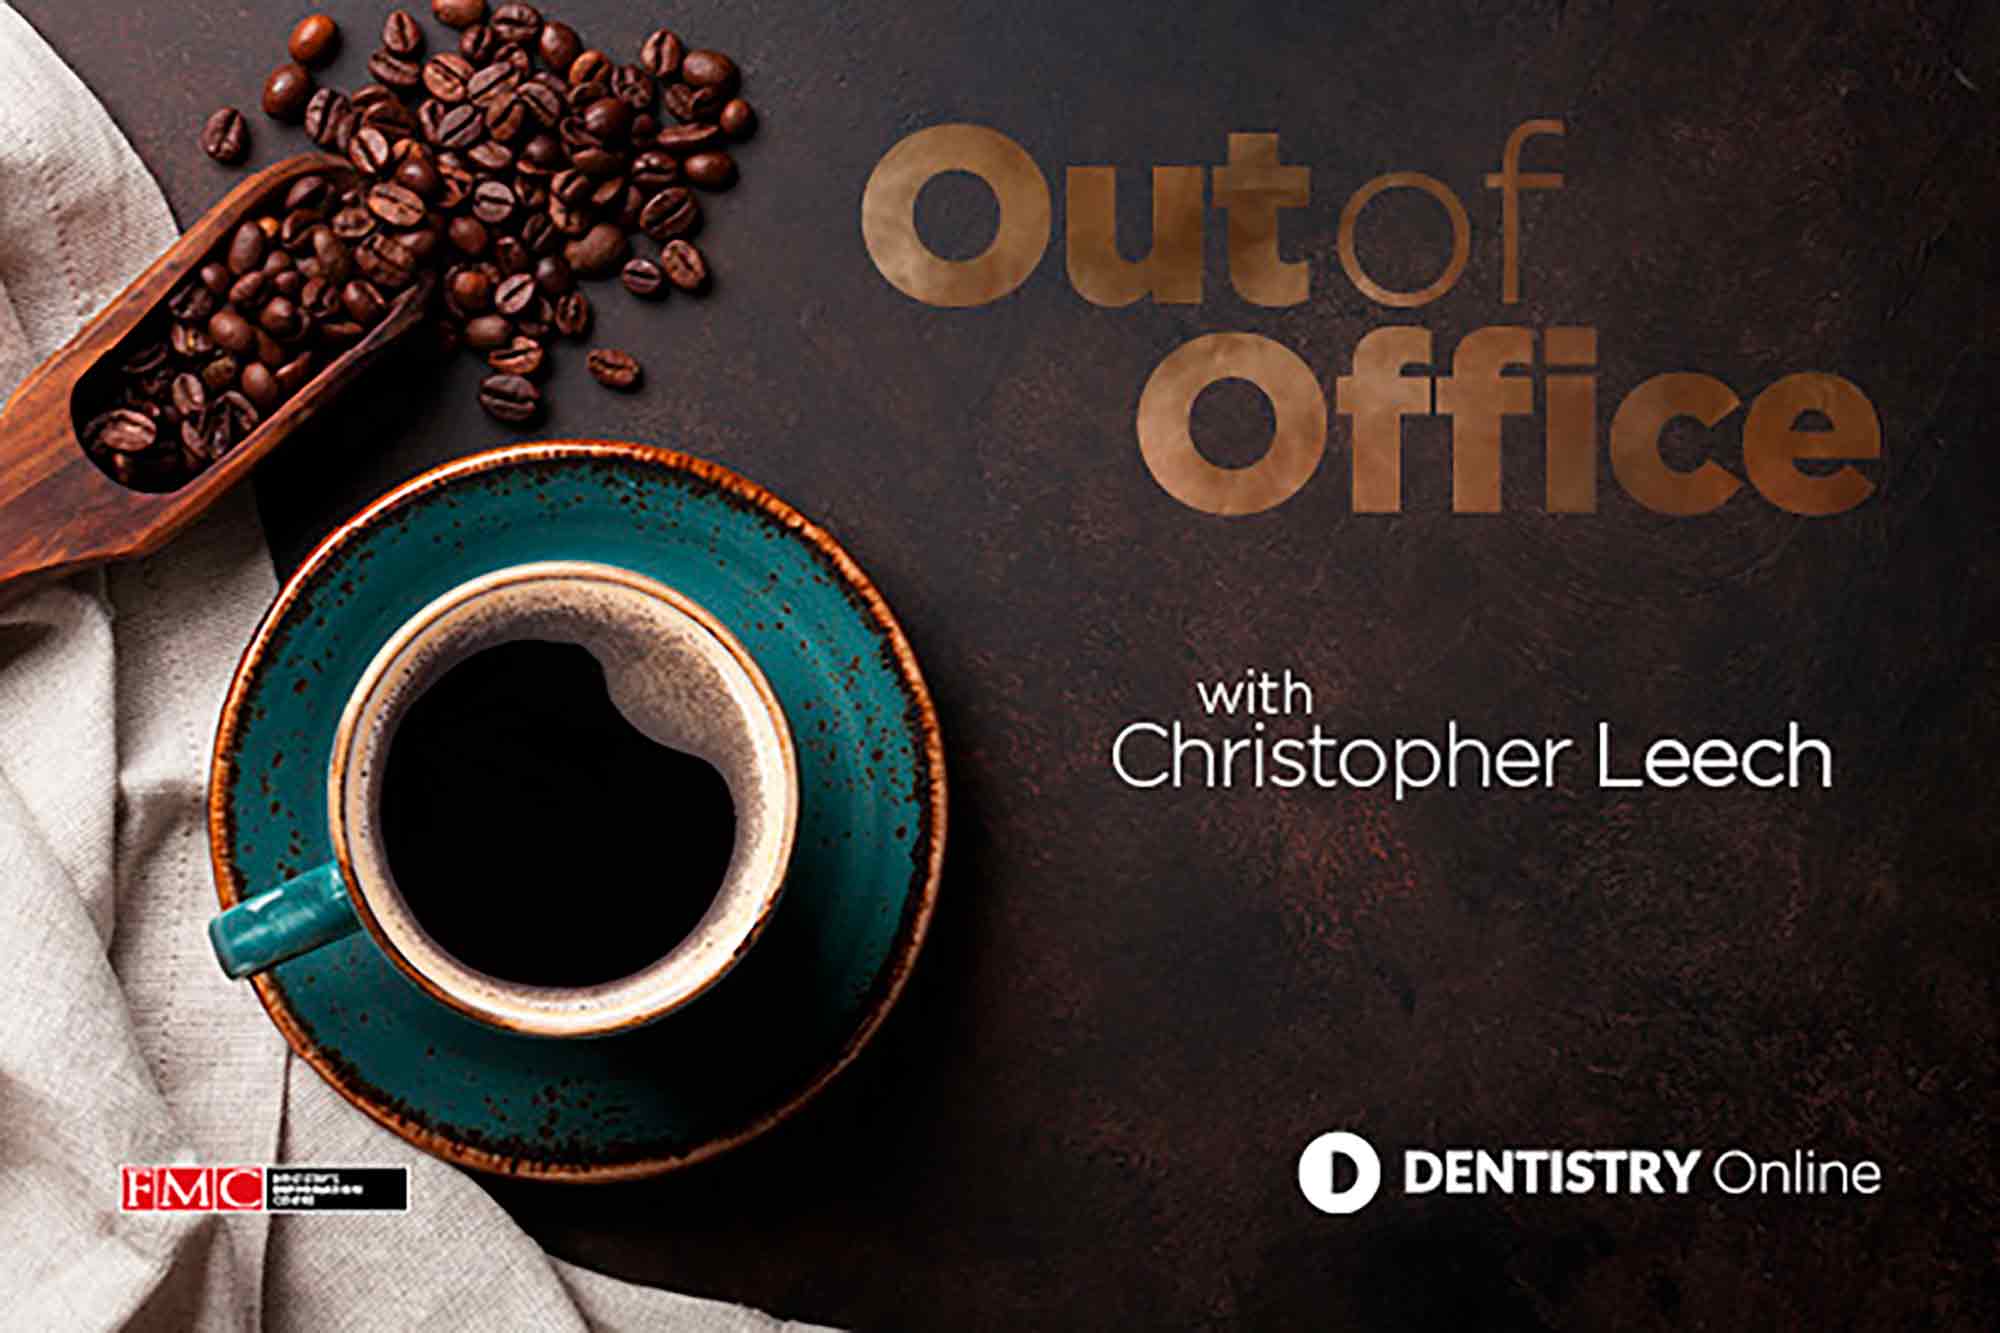 In this week's Out of Office, Christopher Leech talks about family time, how he unwinds and what makes a good coffee